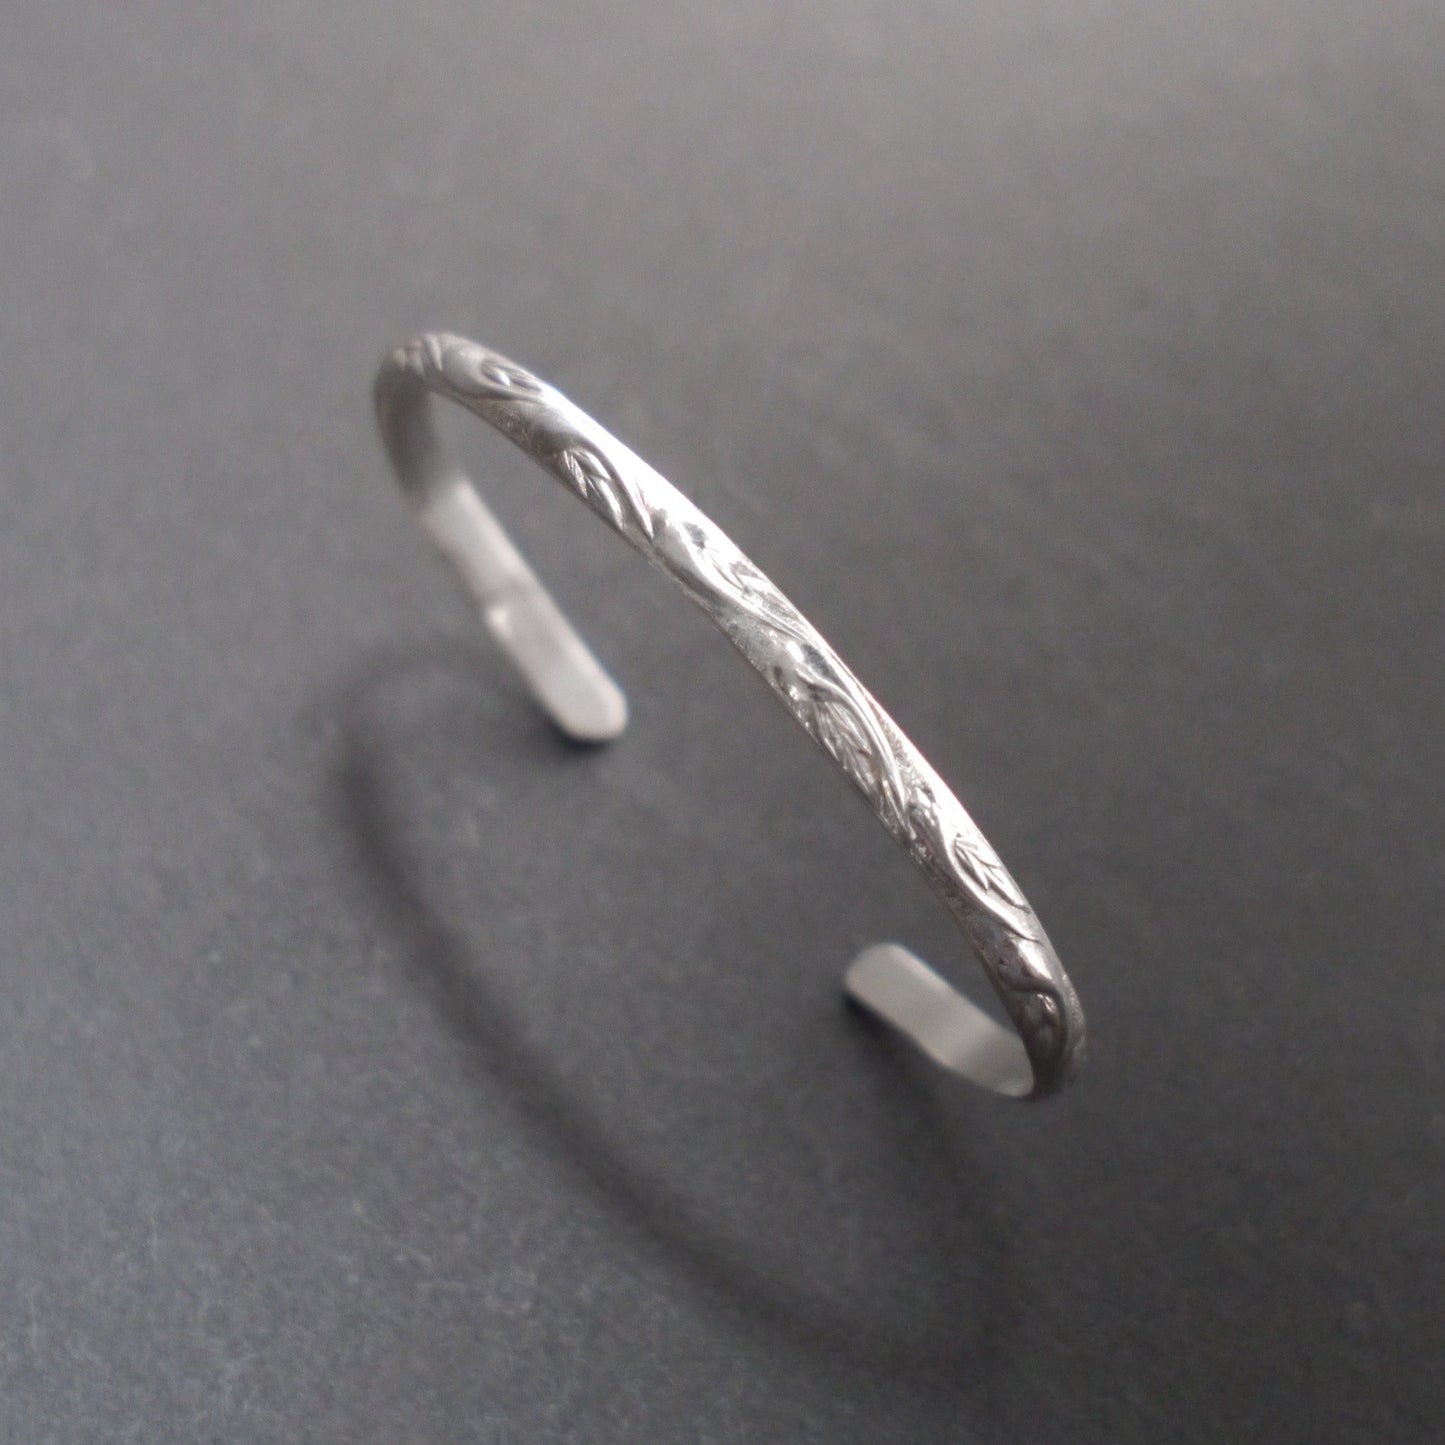 Paisley Pattern Cuff in 4mm Sterling Sliver